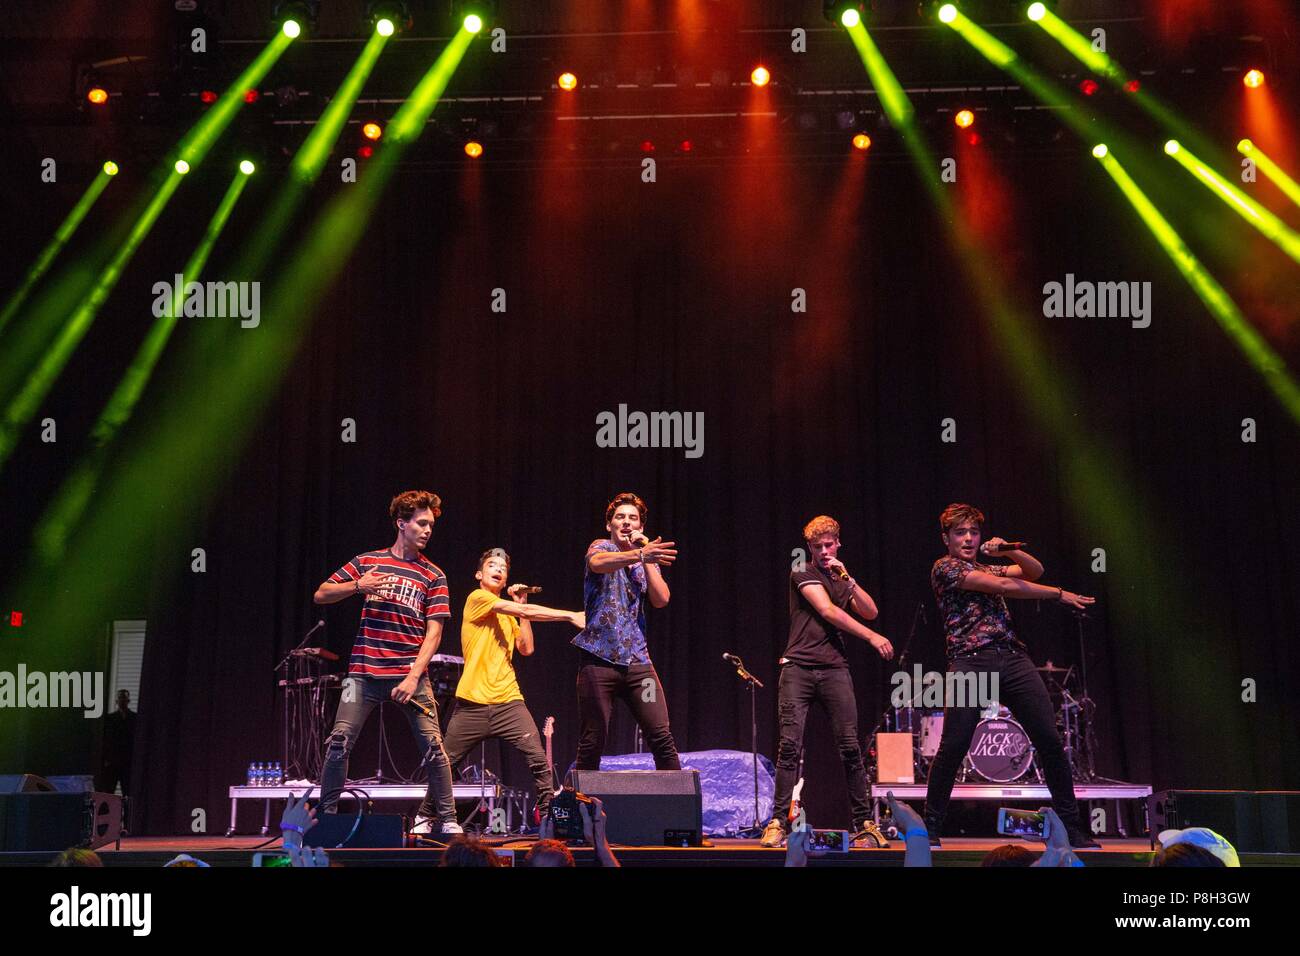 Milwaukee, Wisconsin, USA. 30th June, 2018. MICHAEL CONOR, DREW RAMOS, CHANCE PEREZ, BRADY TUTTON and SERGIO CALDERON of In Real Life during Summerfest Music Festival at Henry Maier Festival Park in Milwaukee, Wisconsin Credit: Daniel DeSlover/ZUMA Wire/Alamy Live News Stock Photo